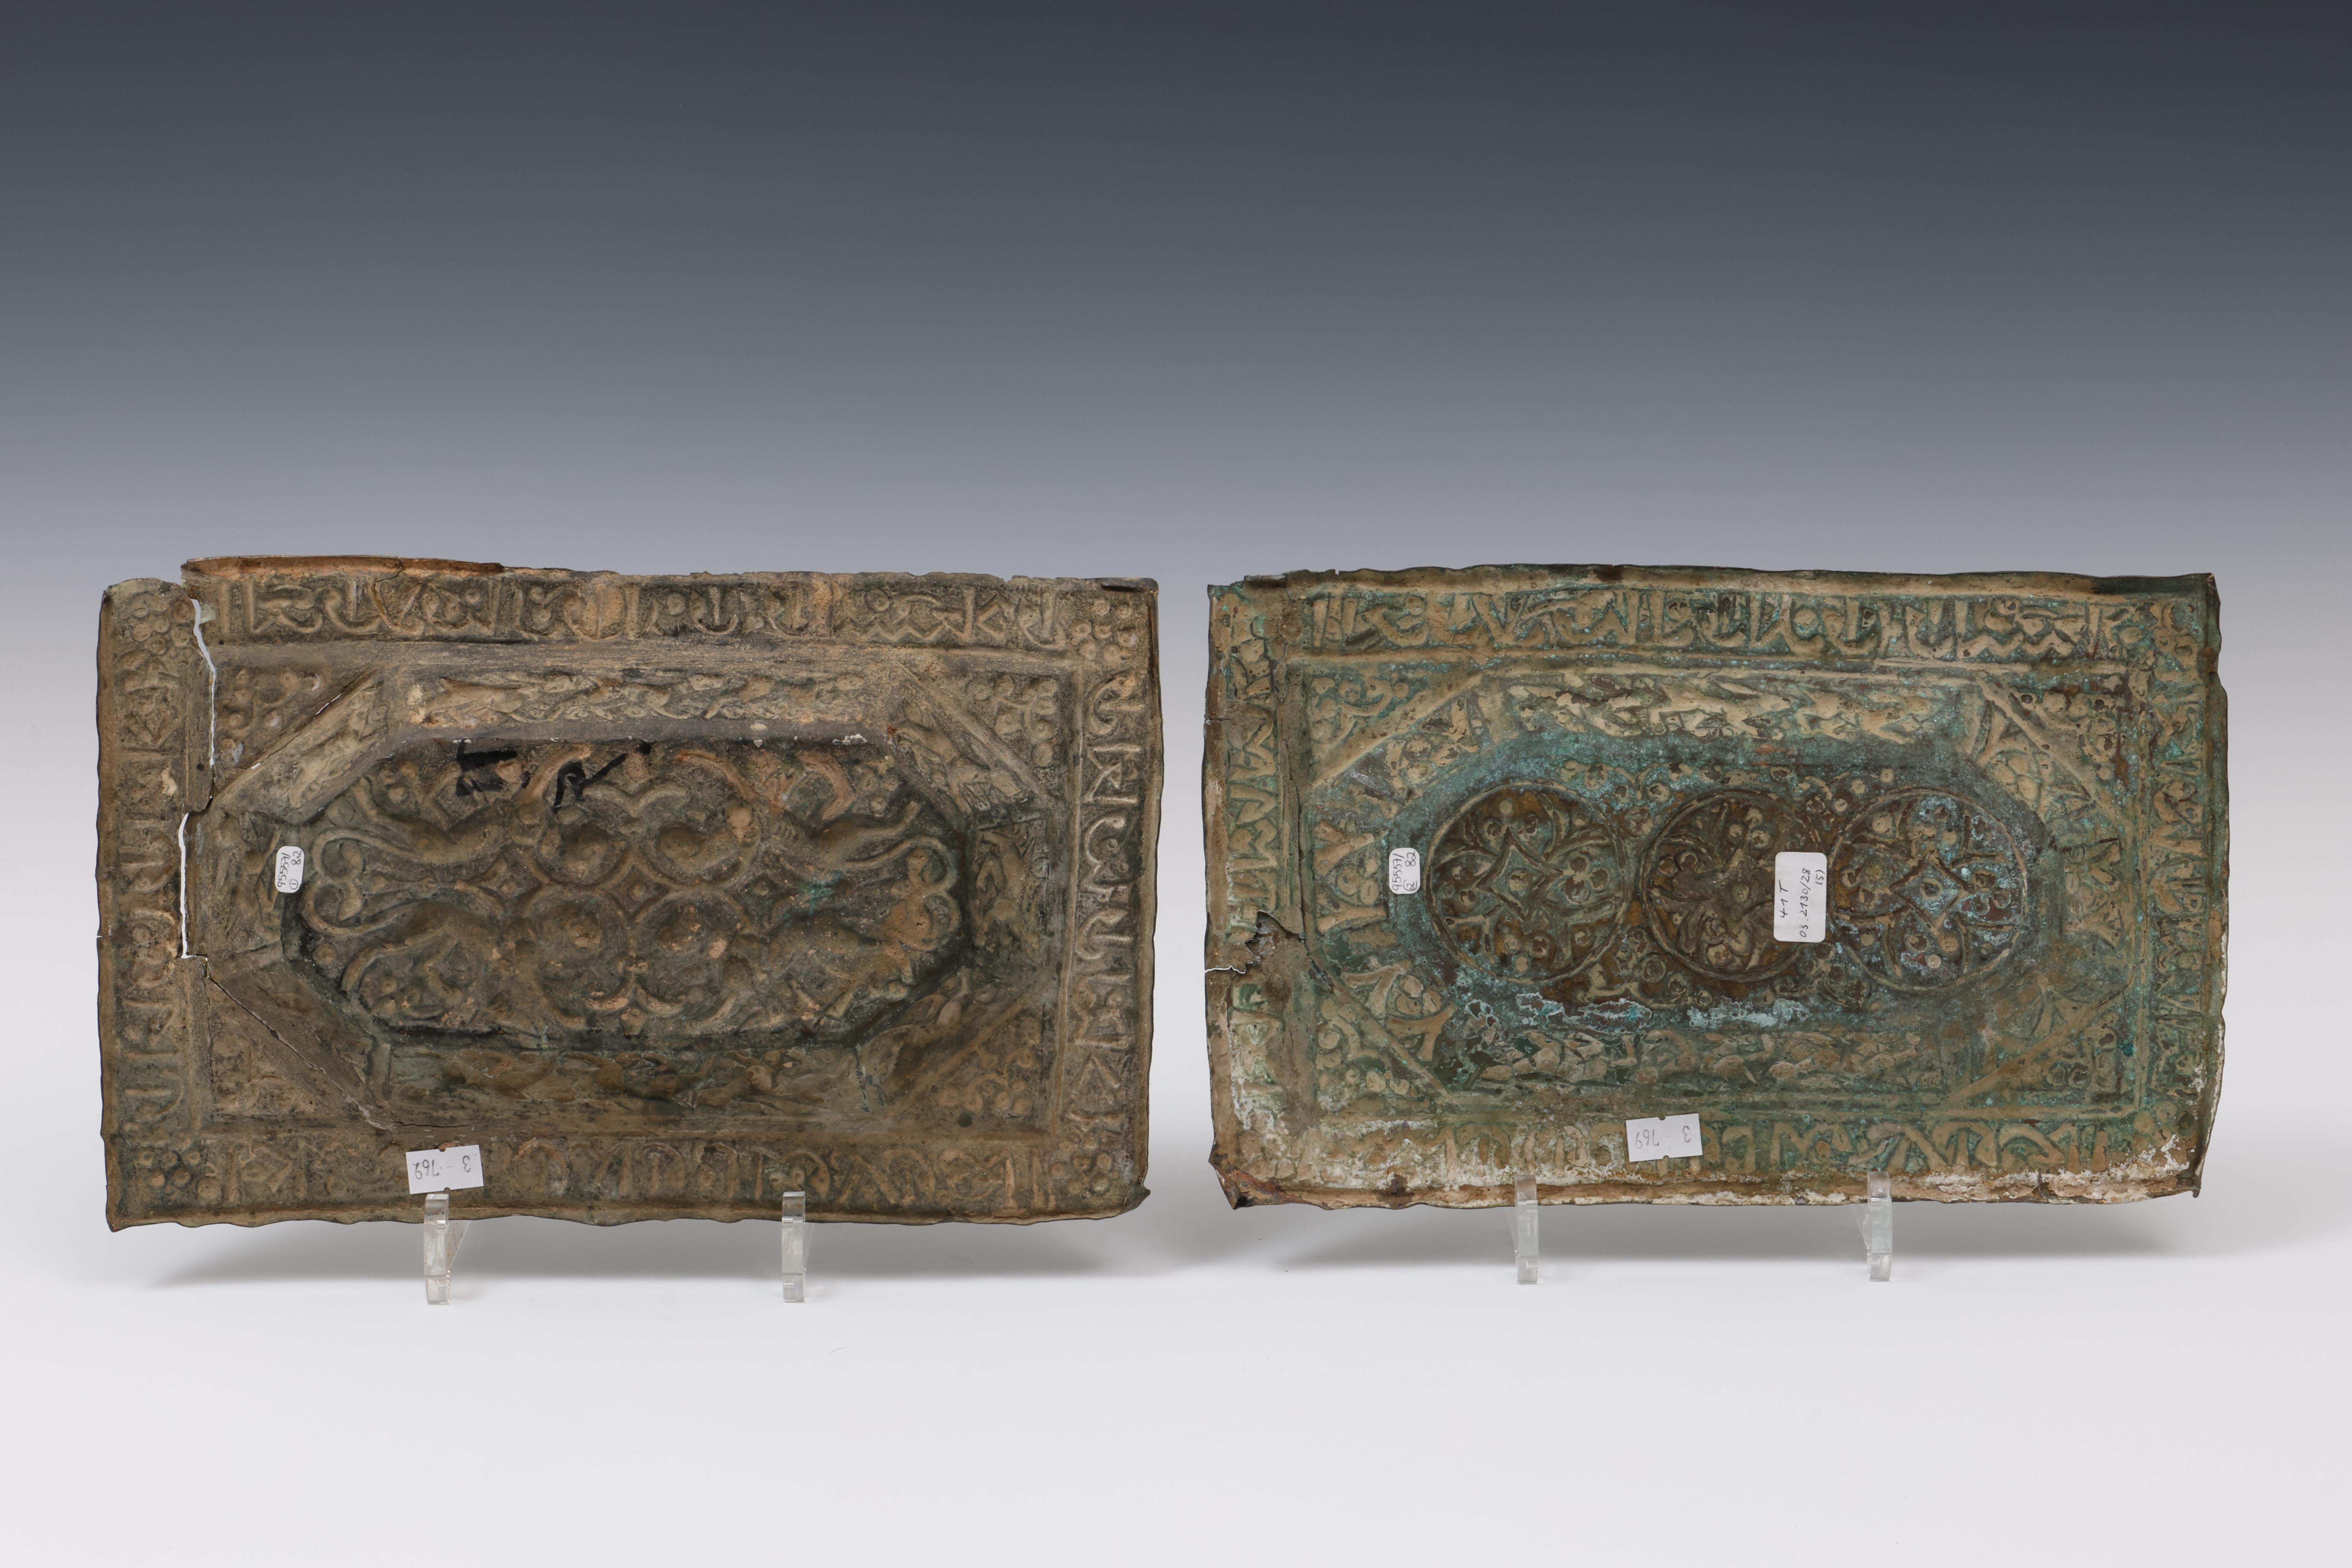 Two Persian Khorasan copper repouse tray's, 12th century of later - Image 2 of 4